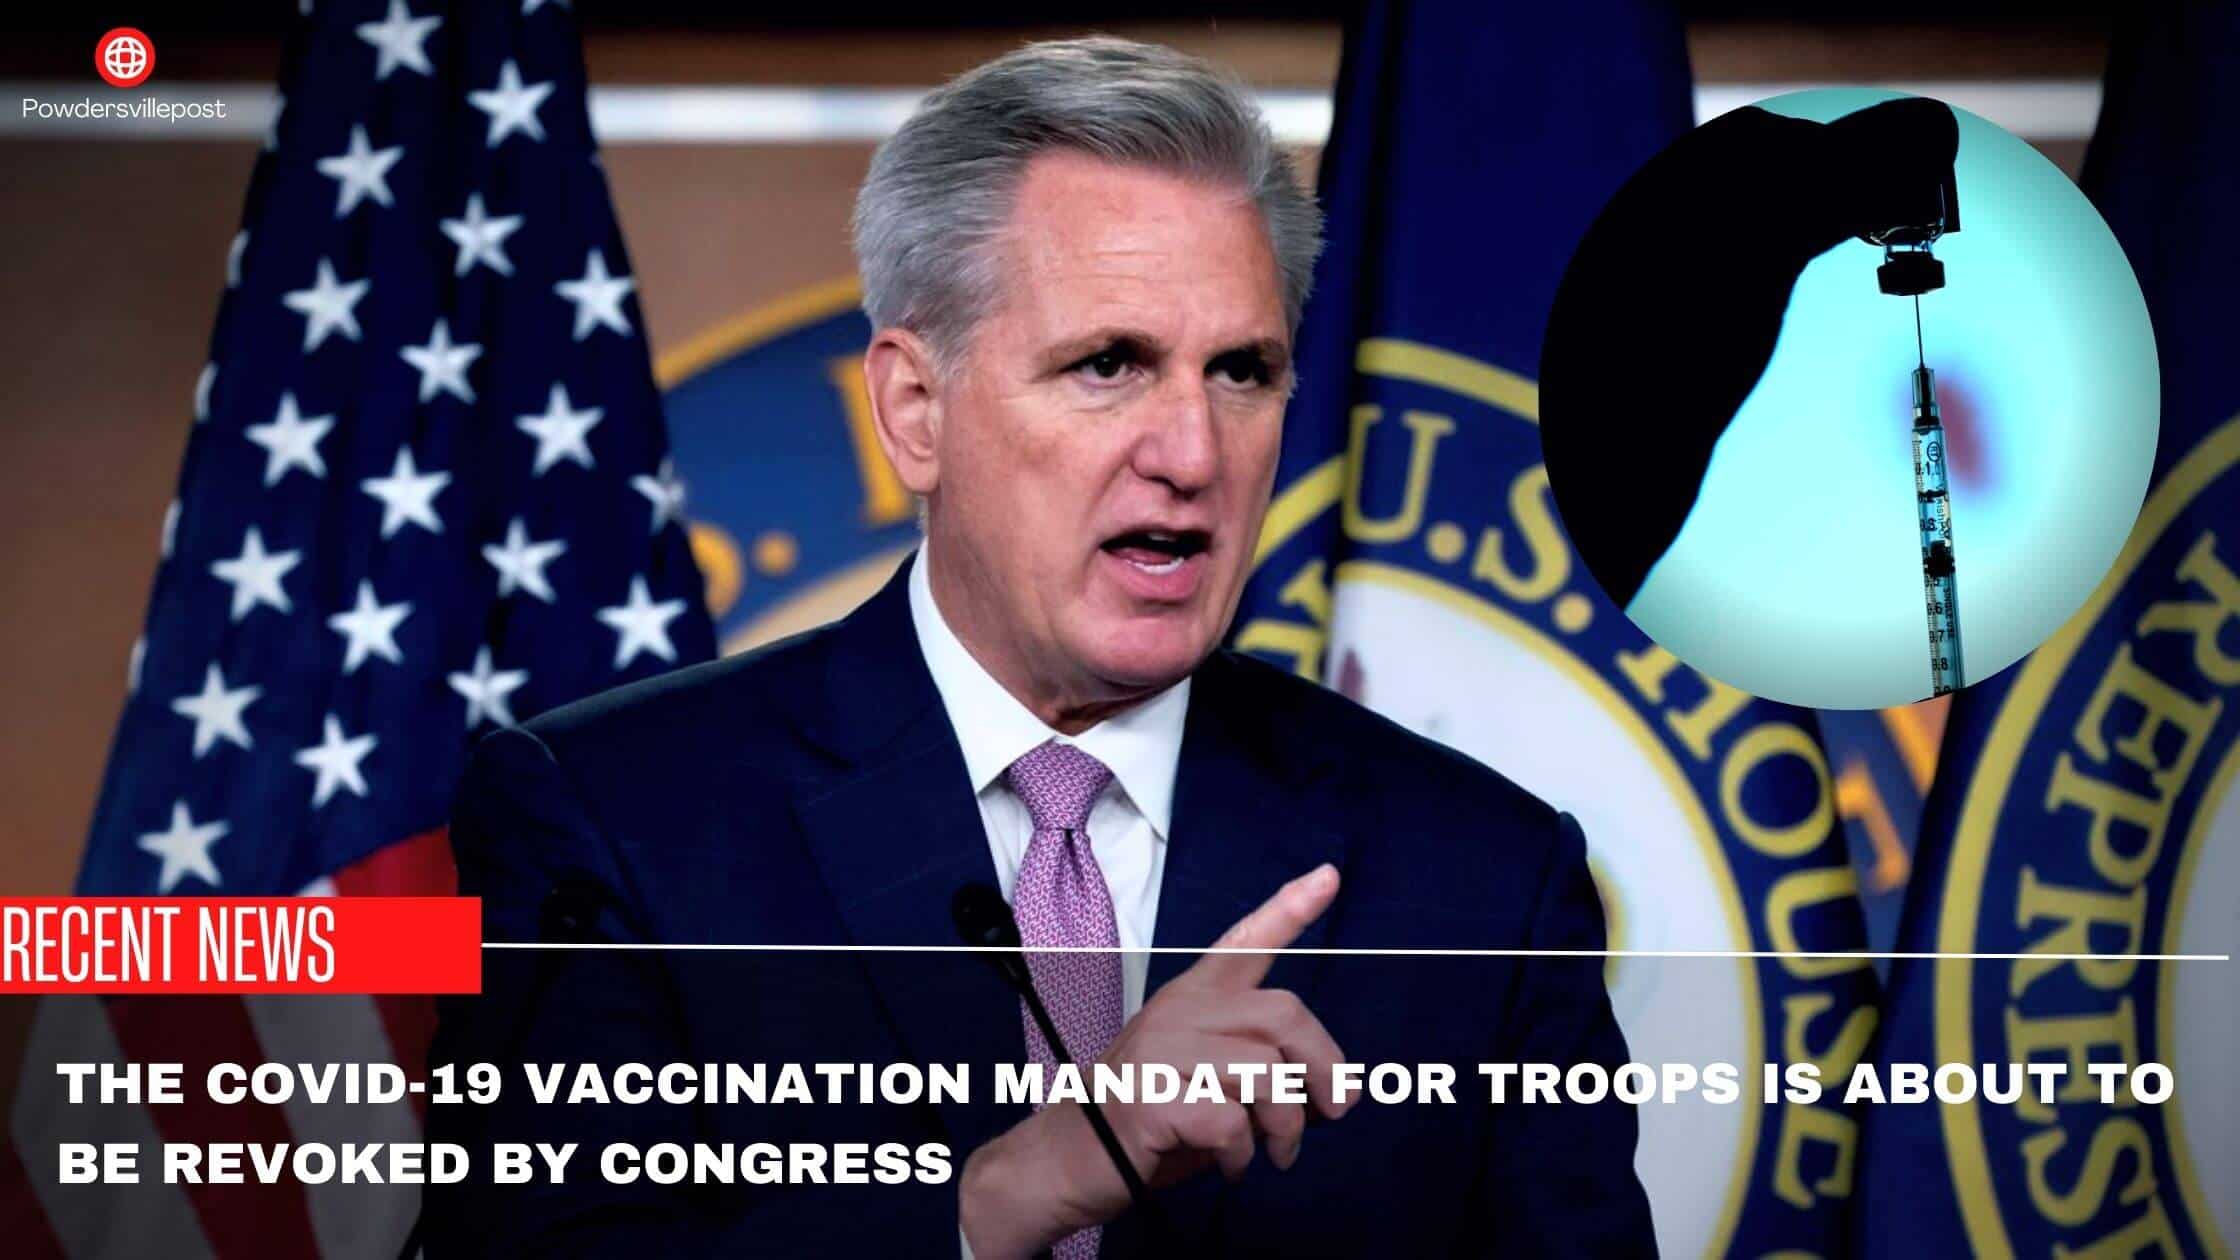 The Covid-19 Vaccination Mandate For Troops Is About To Be Revoked By Congress